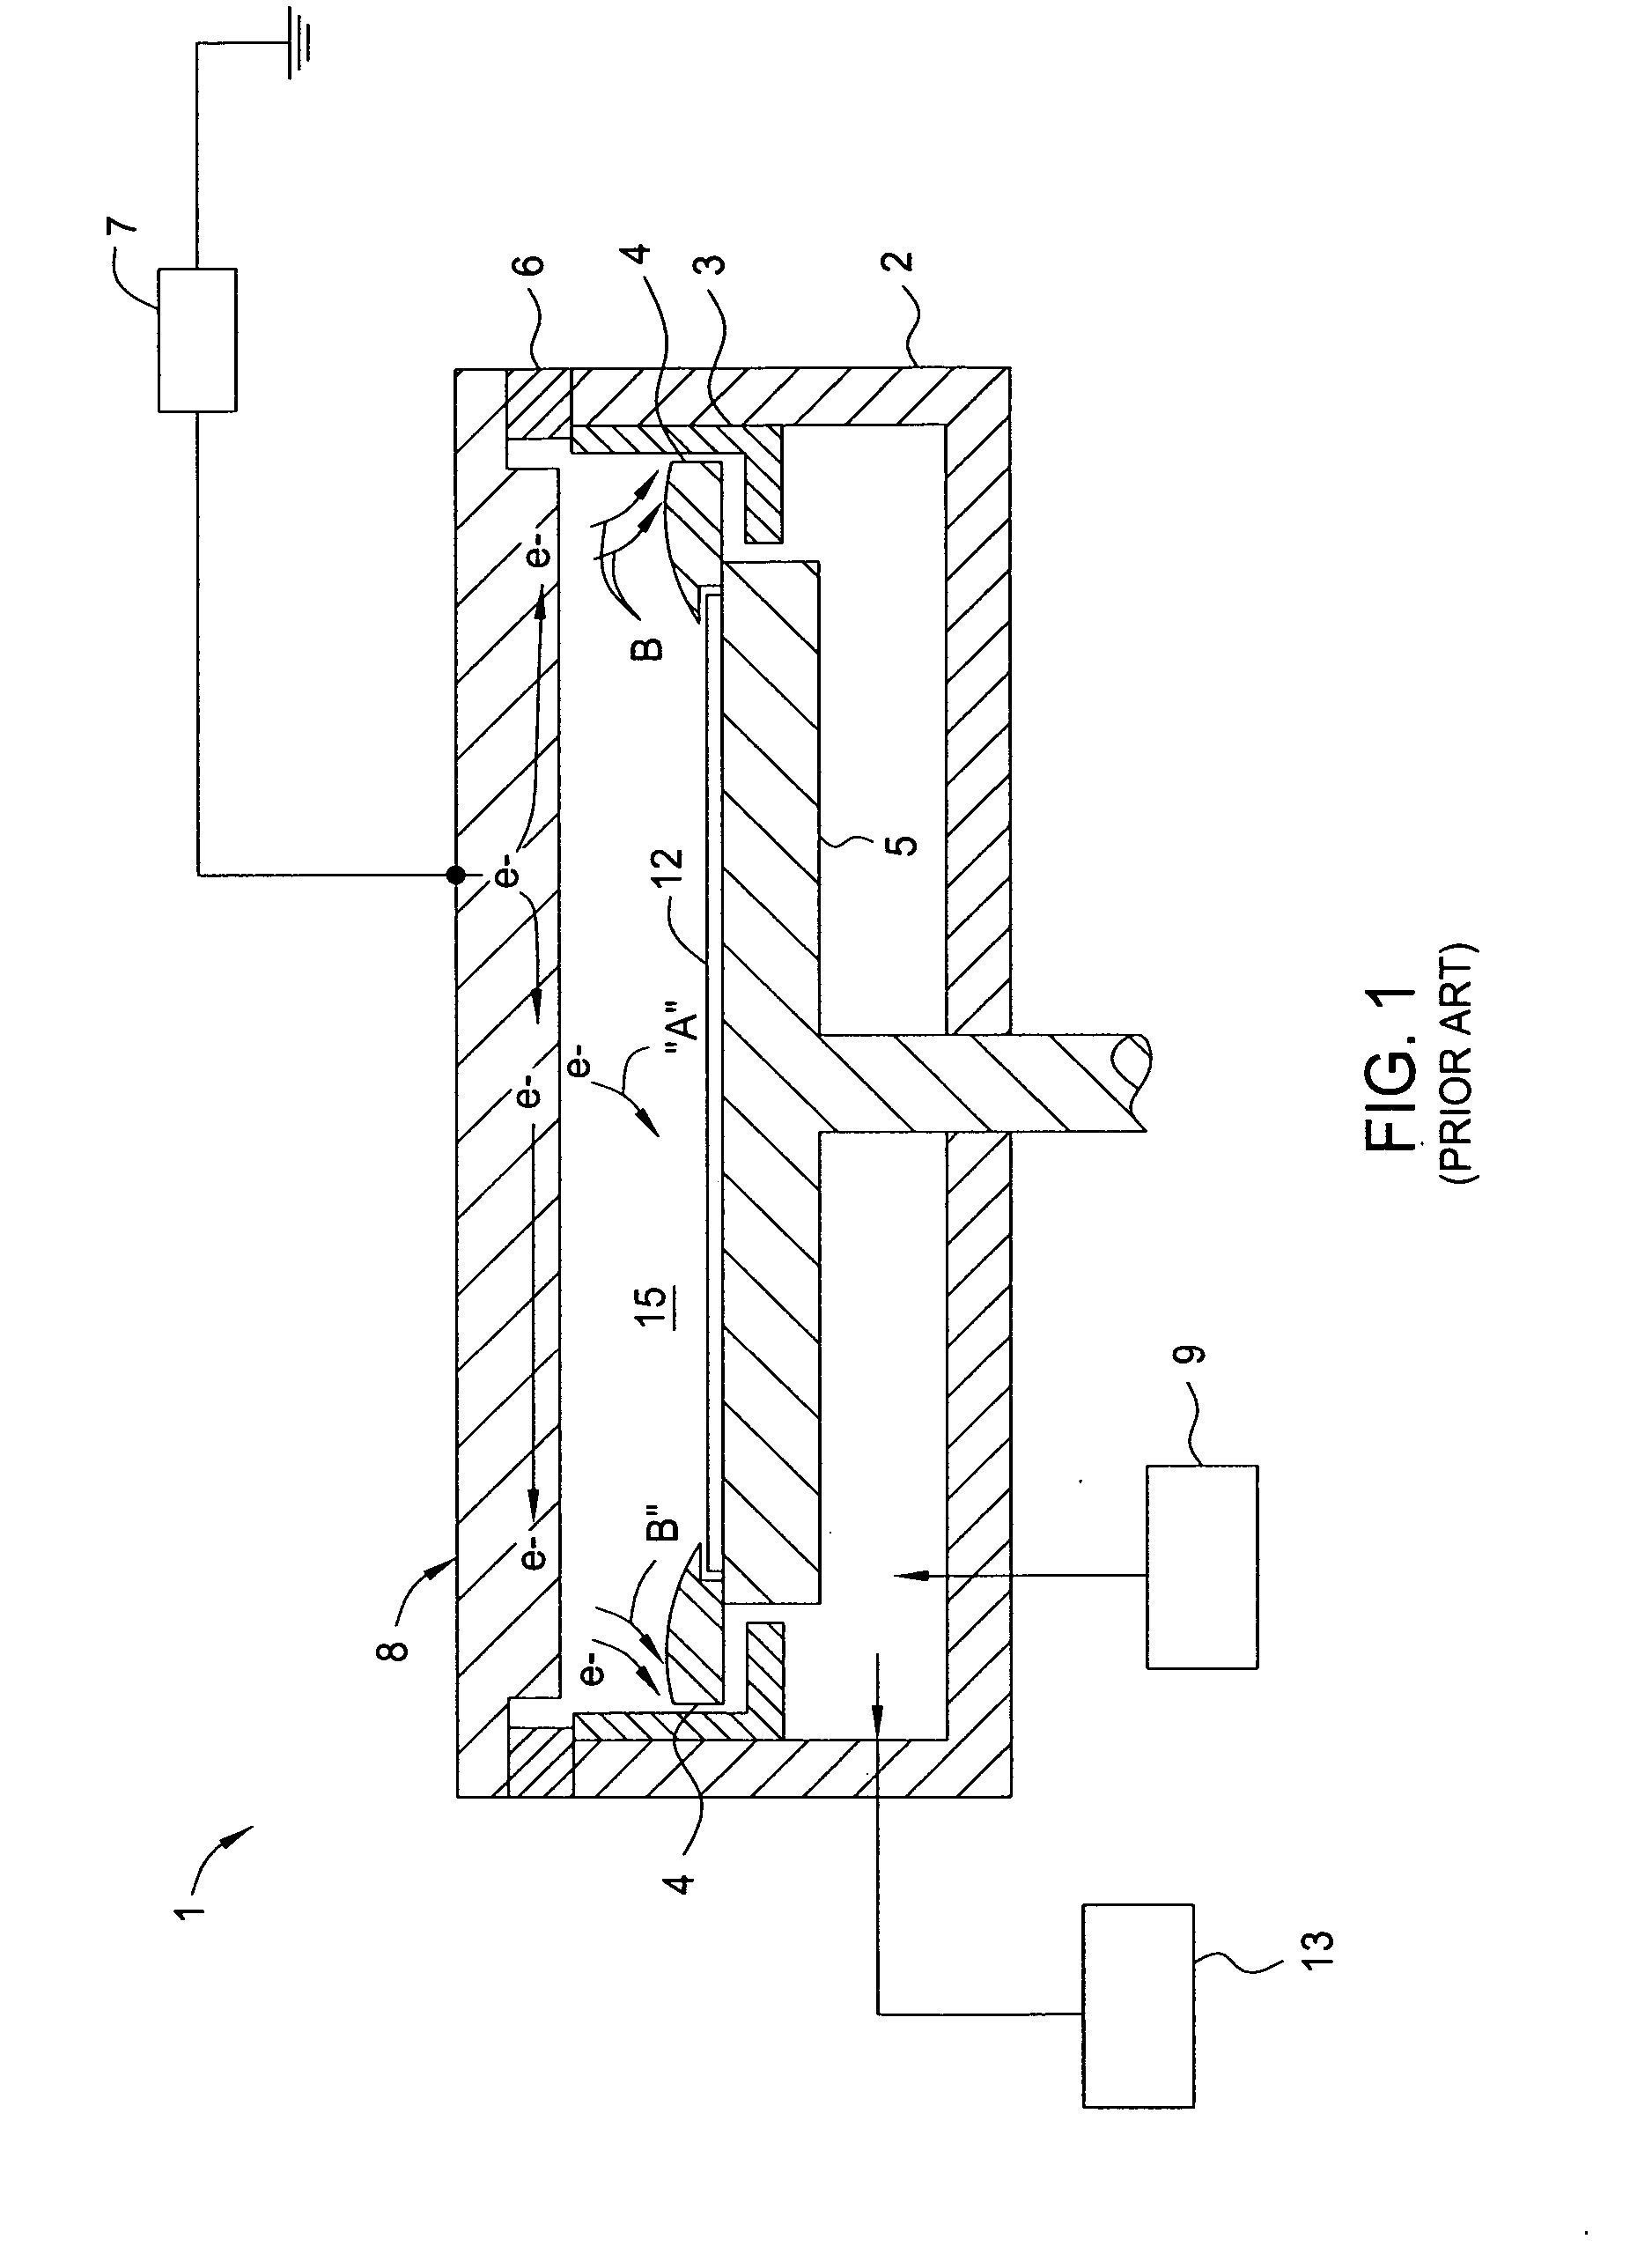 Method of improving magnetron sputtering of large-area substrates using a removable anode